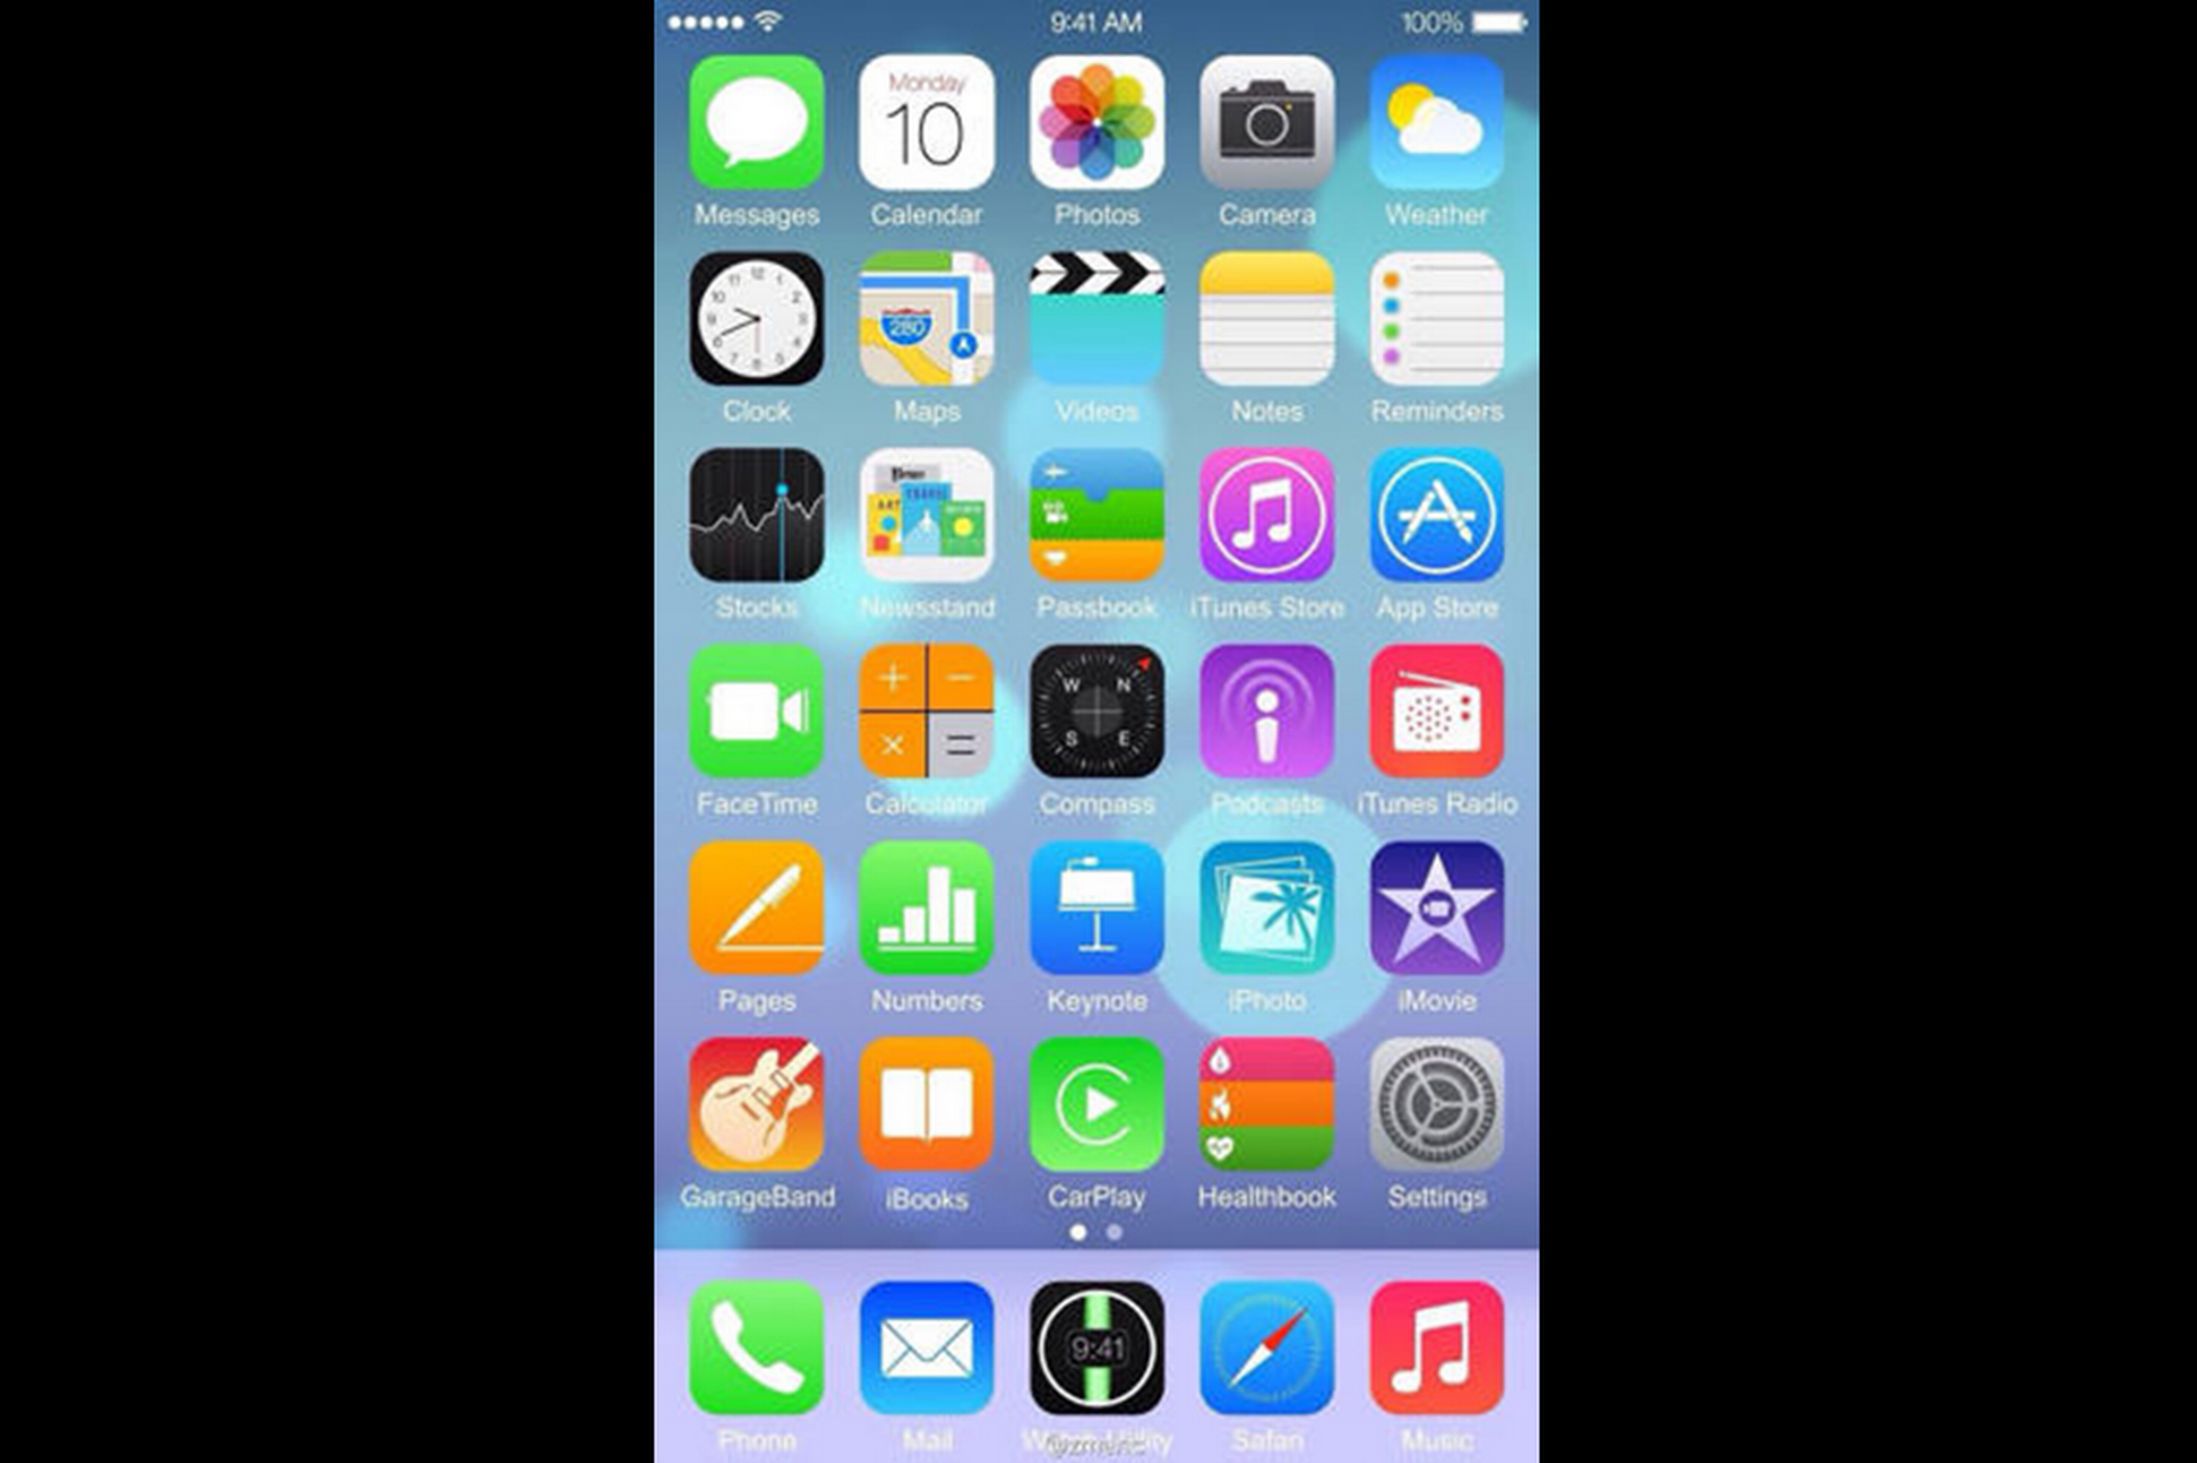 Apple Inc. (AAPL) iPhone 6 New Images And Screenshots Of